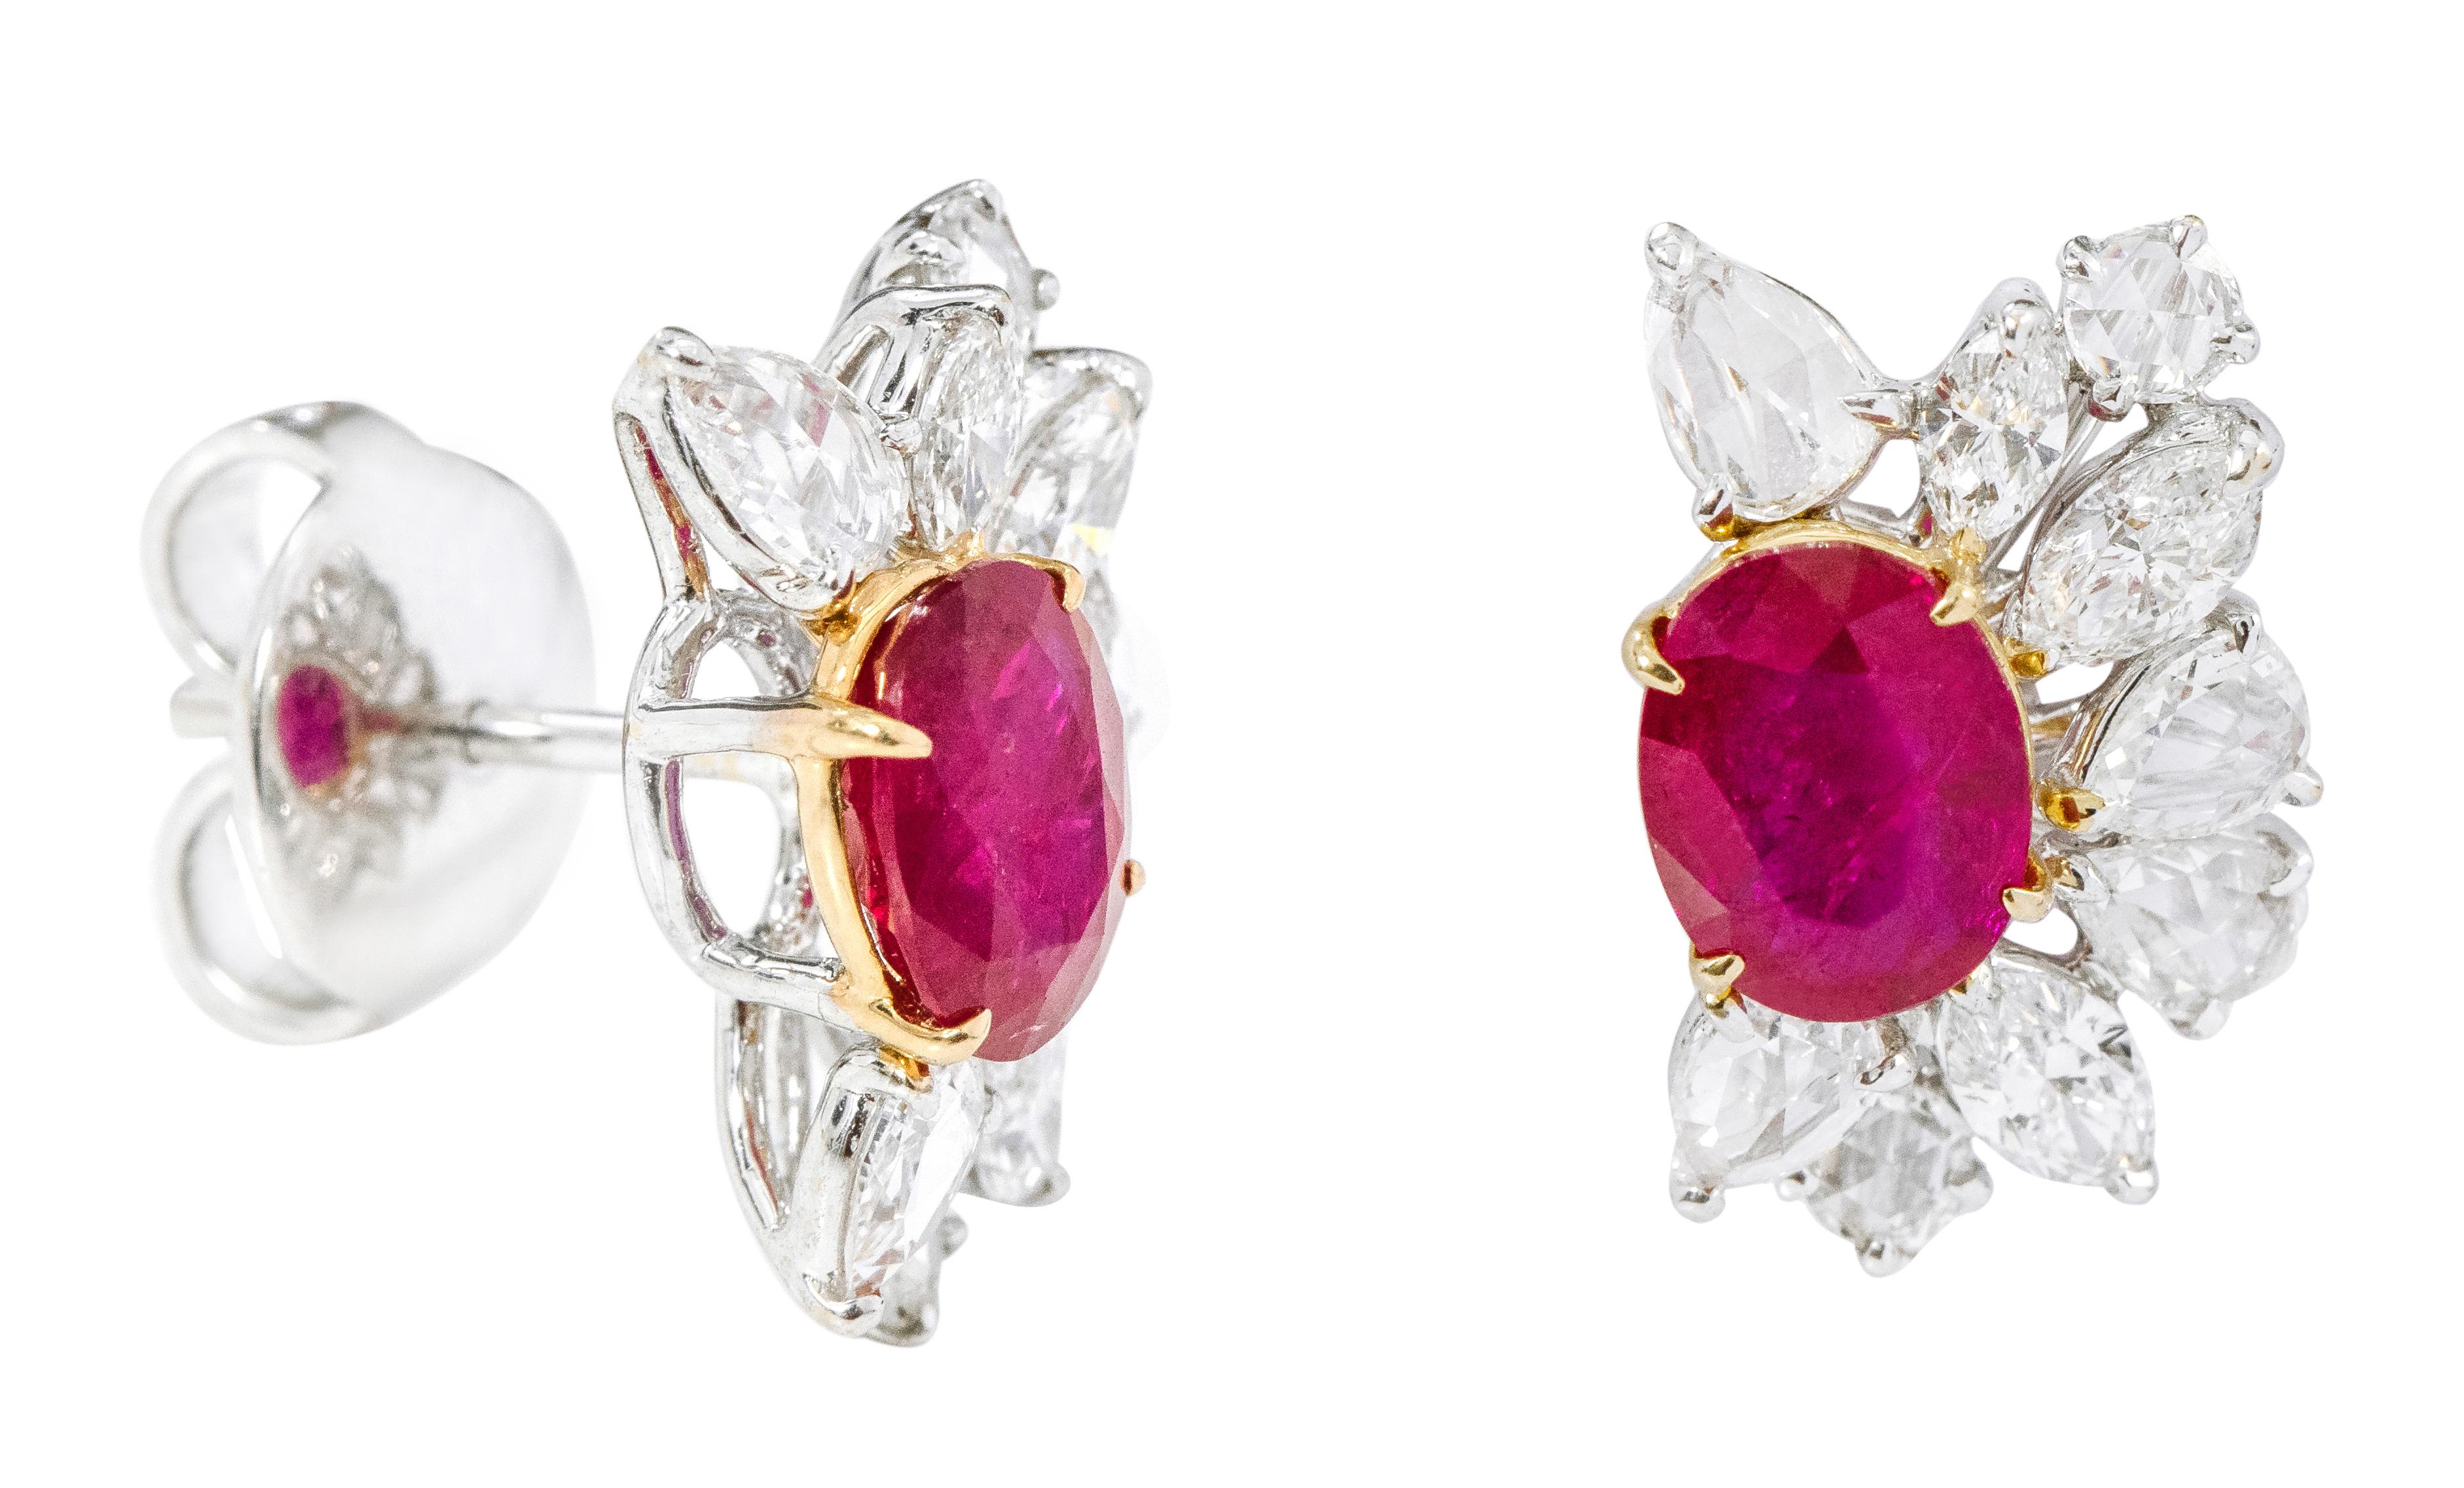 18 Karat White Gold 4.96 Carats Ruby and Diamond Statement Stud Earrings

This glorious pigeon blood red ruby and diamond earring is sensational. The solitaire oval ruby with a leveled up and down solitaire rose cut pear and full-cut marquise and